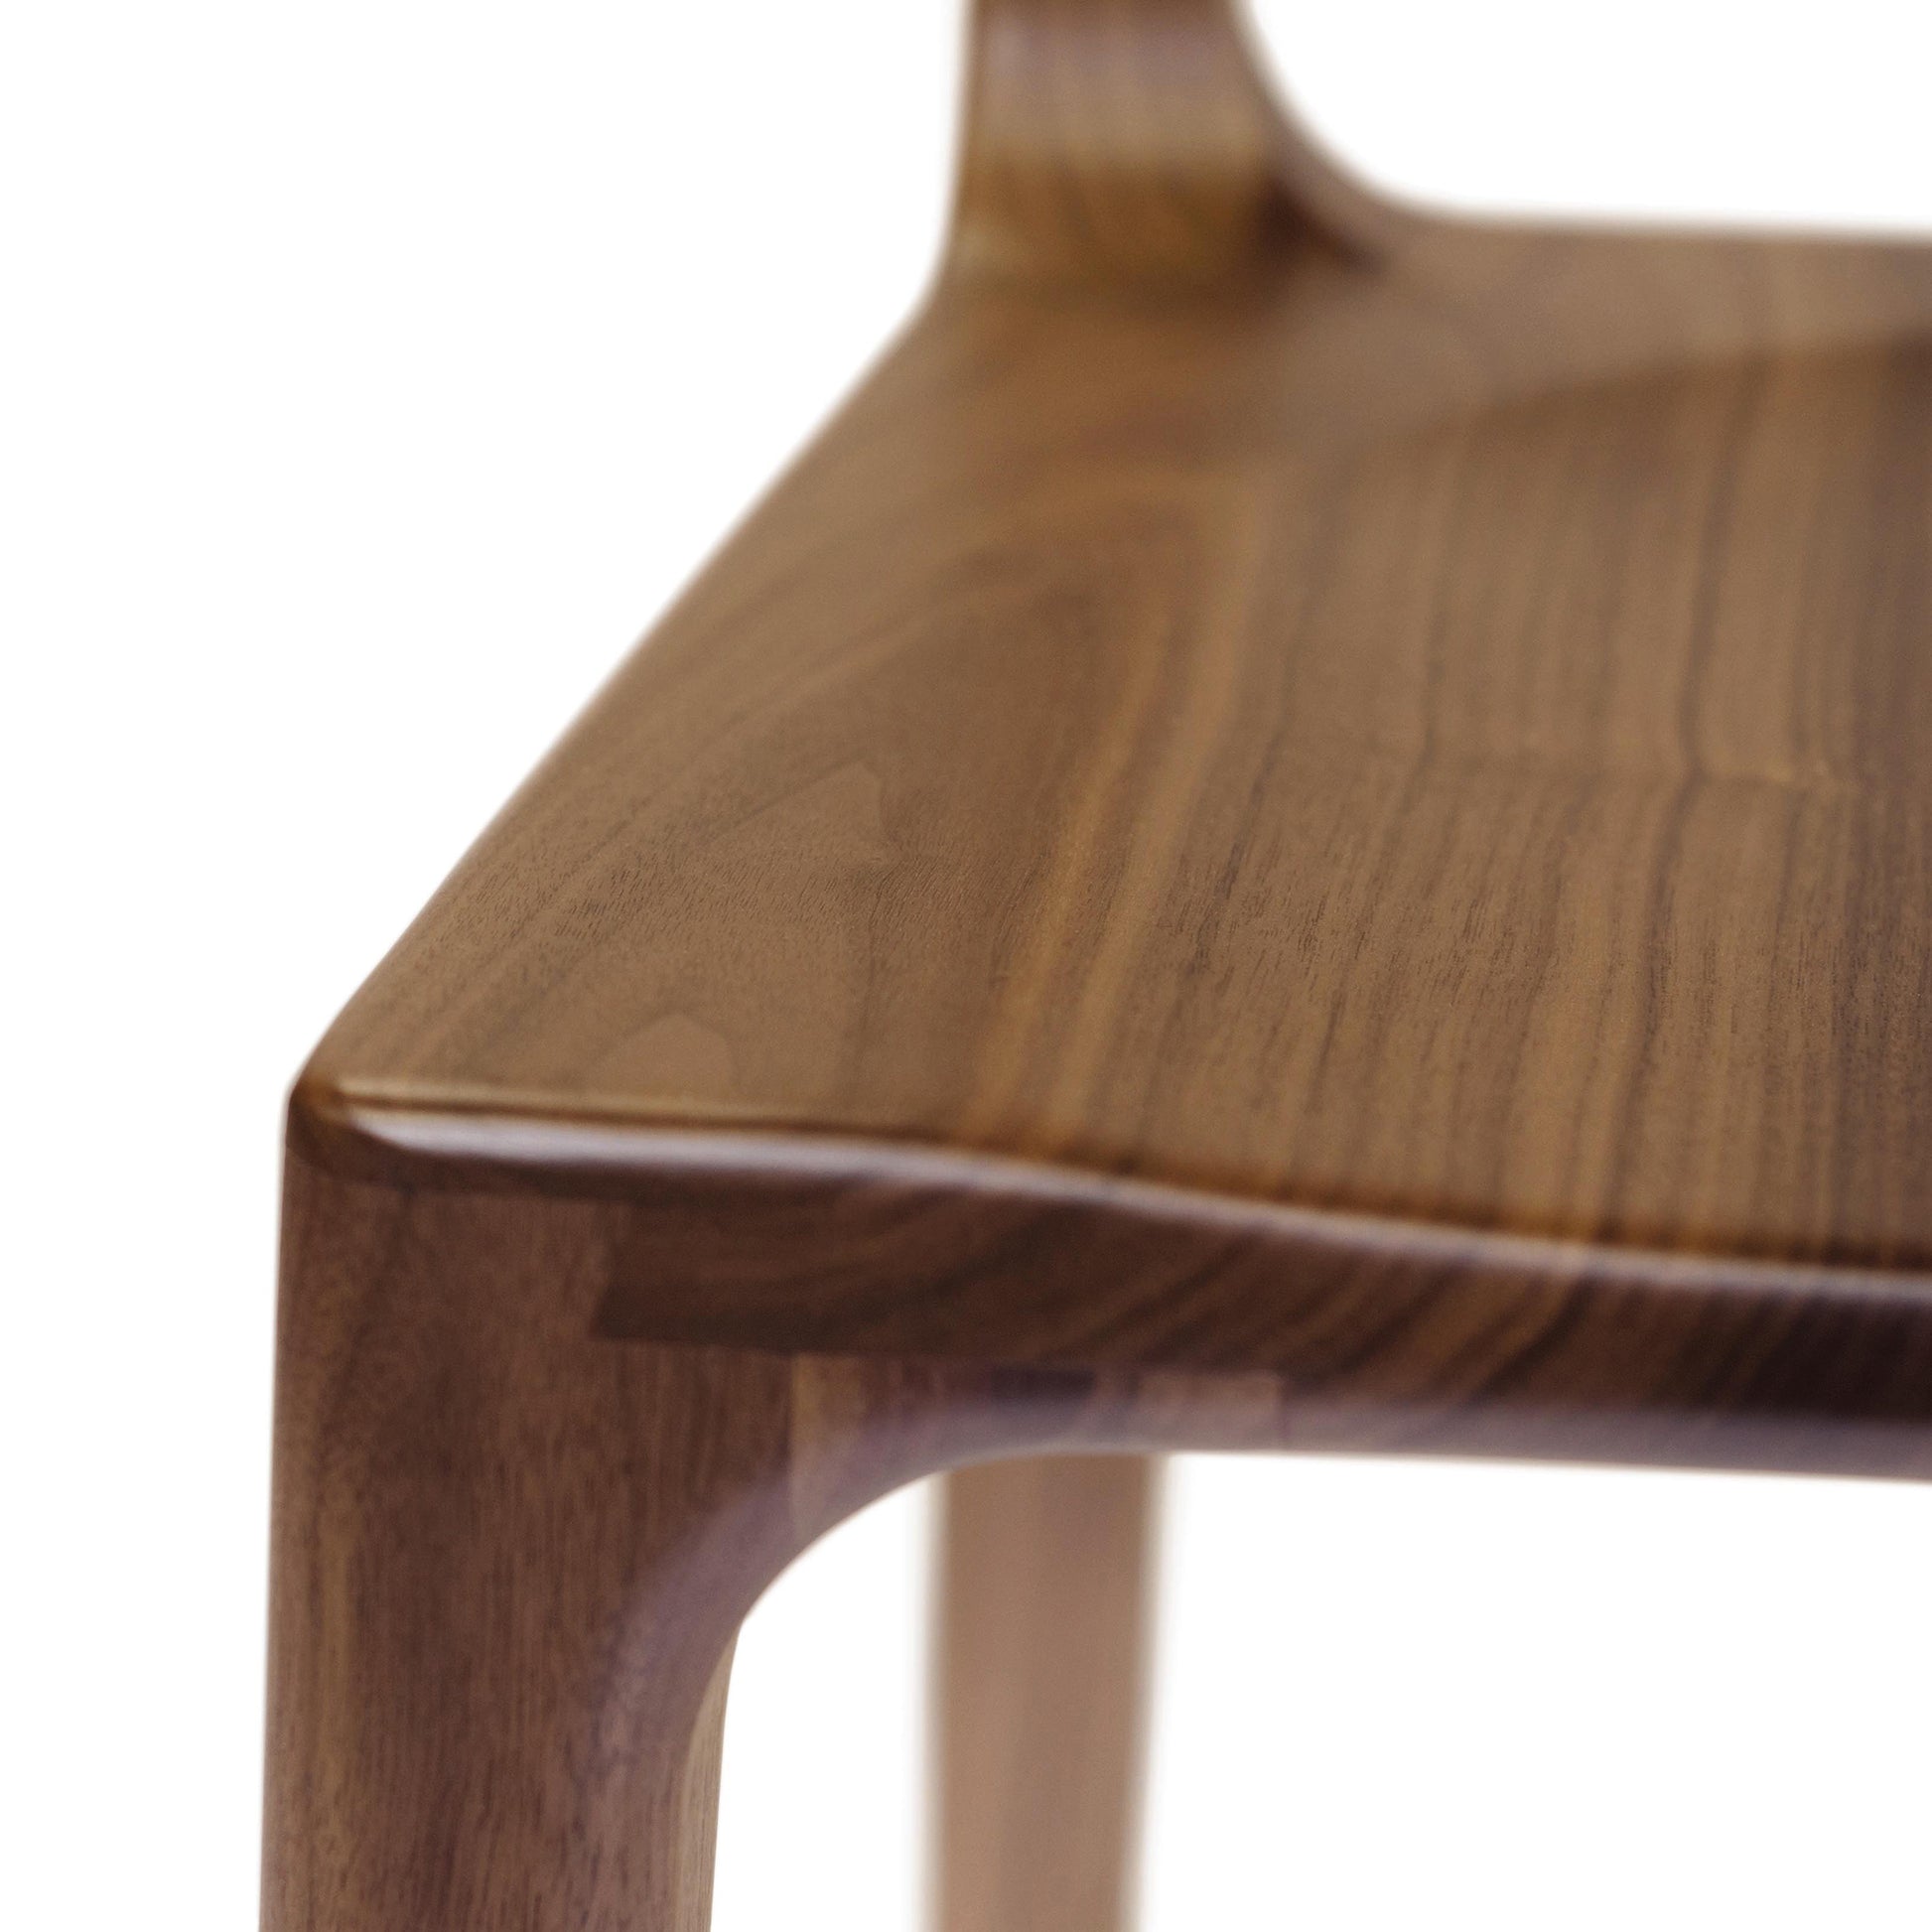 A close up view of a walnut dining chair.